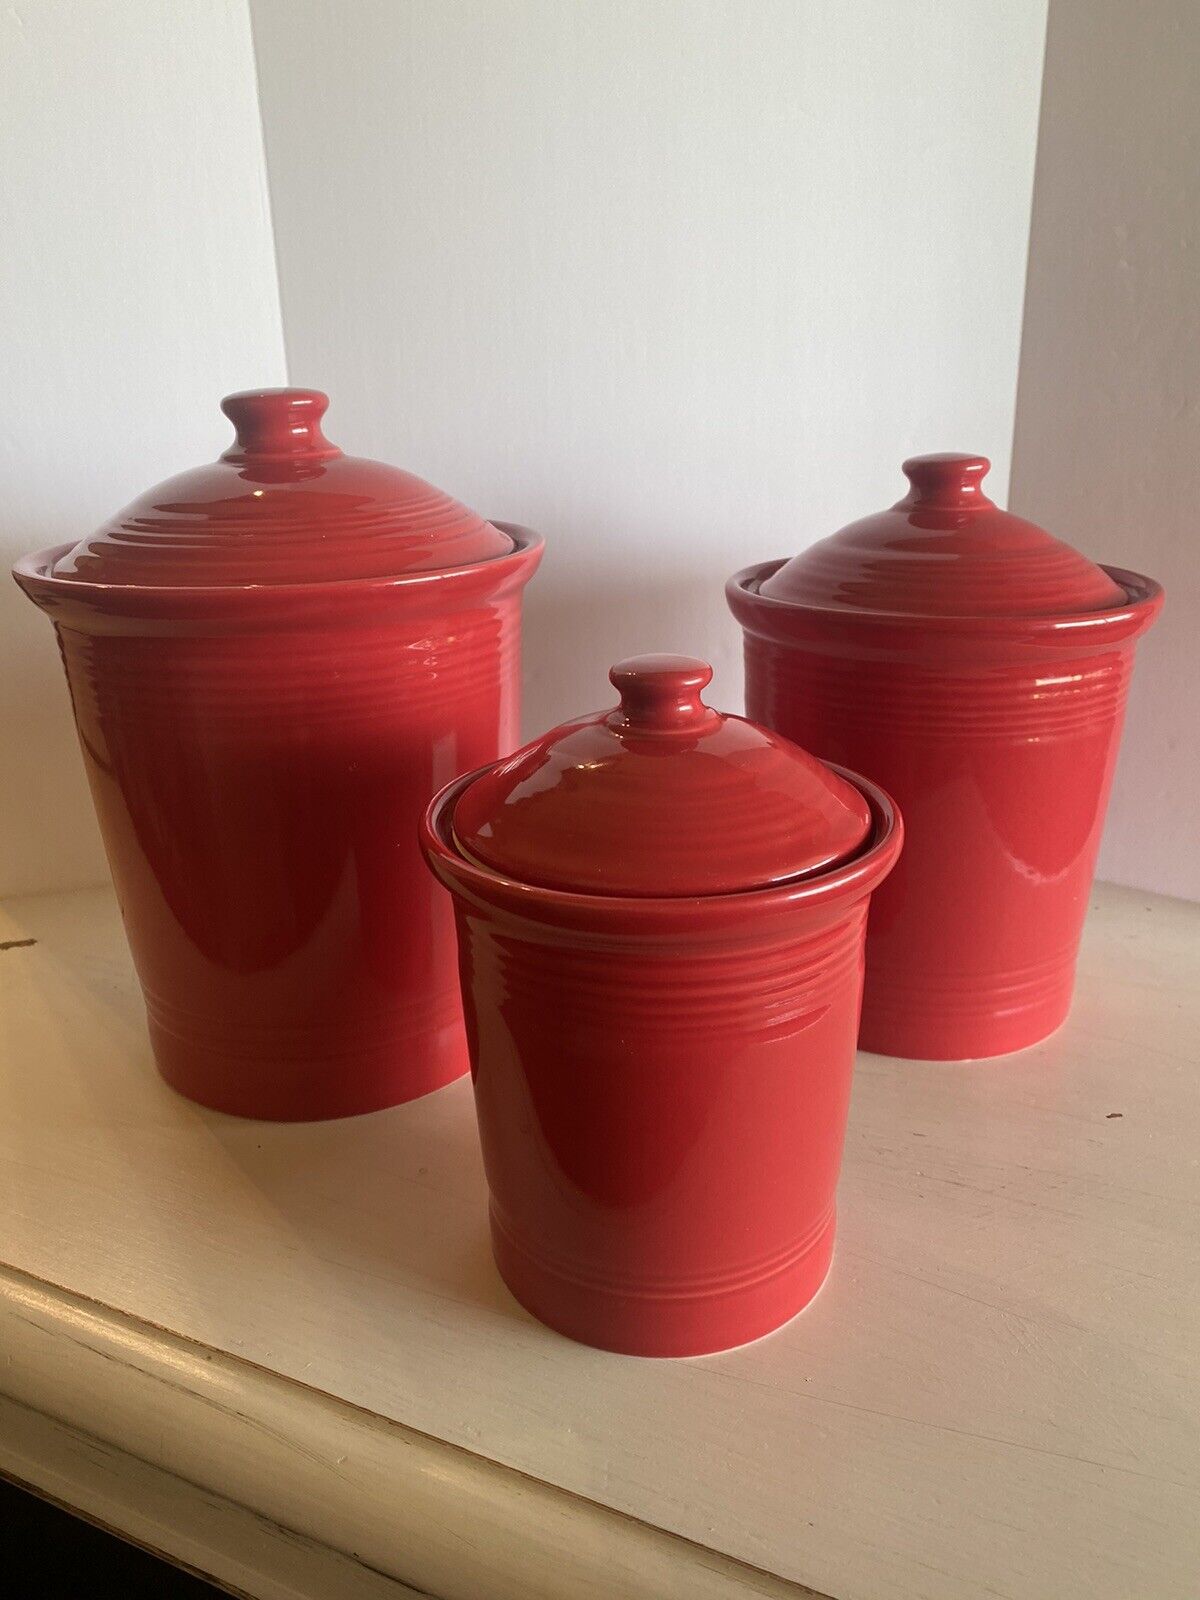 3 Piece Fiesta Ware Canisters Set Lids Retired Scarlet Red